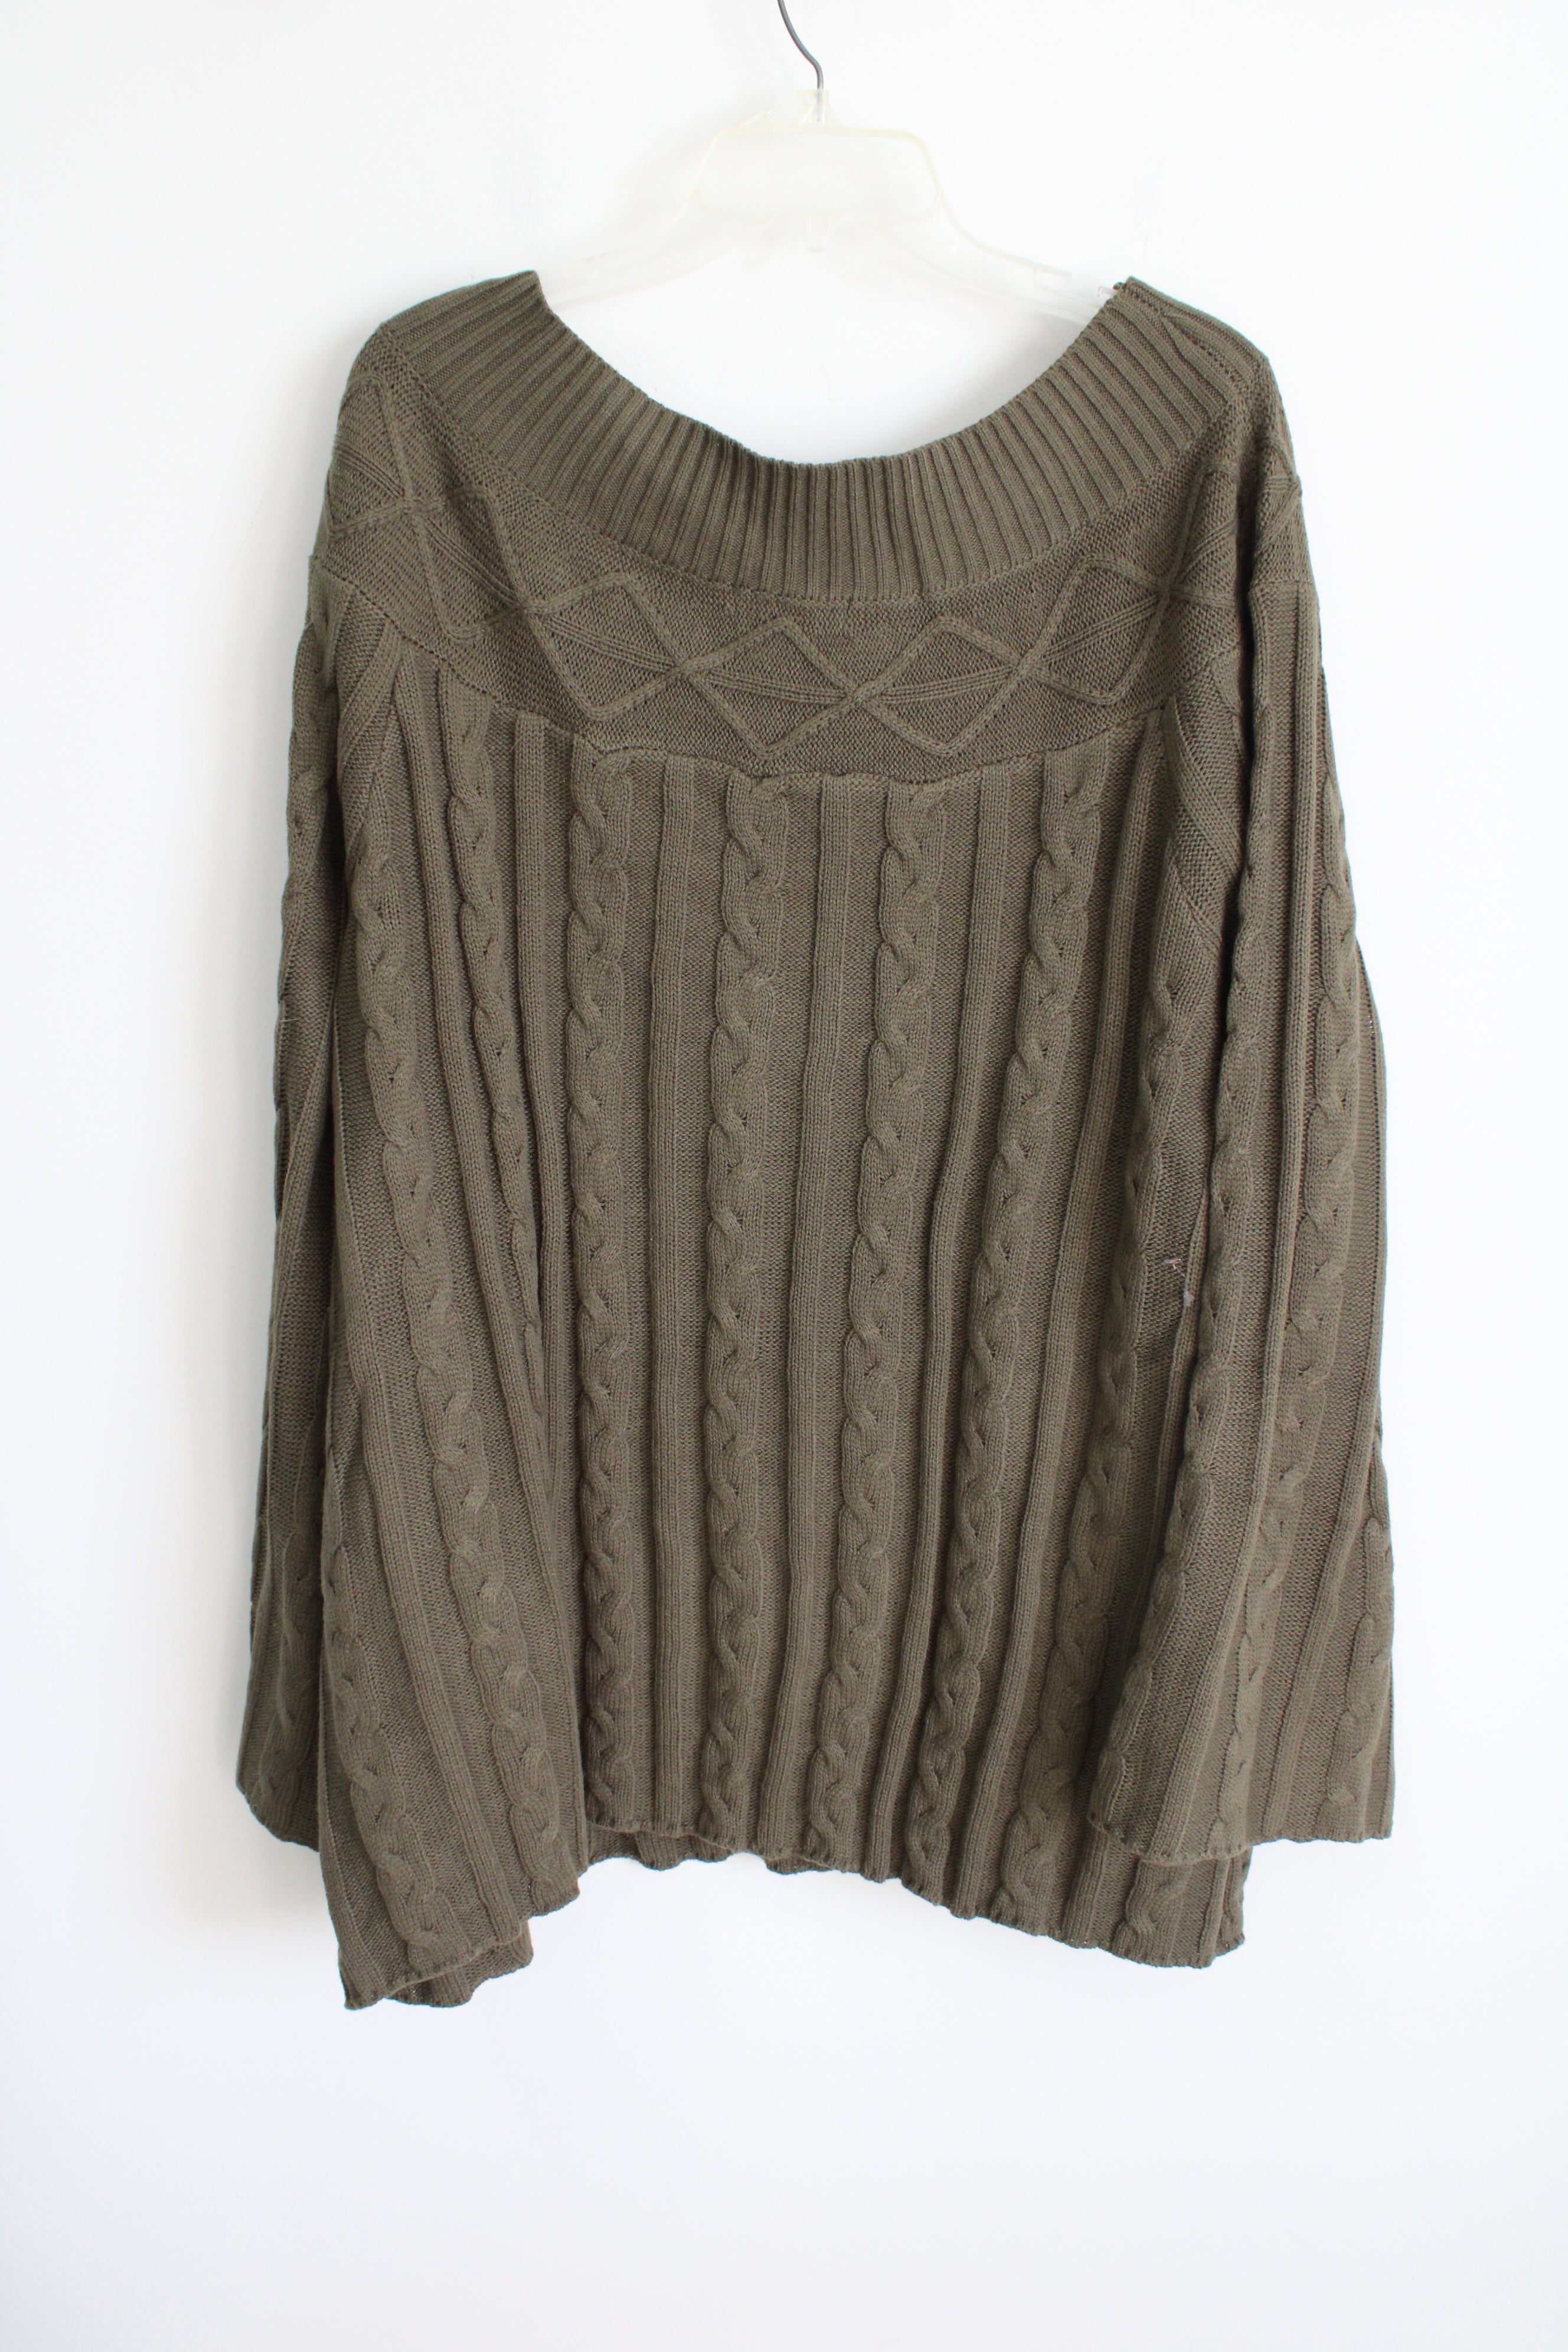 Jessica London Green Cable Knit Sweater | 3X (30/32)